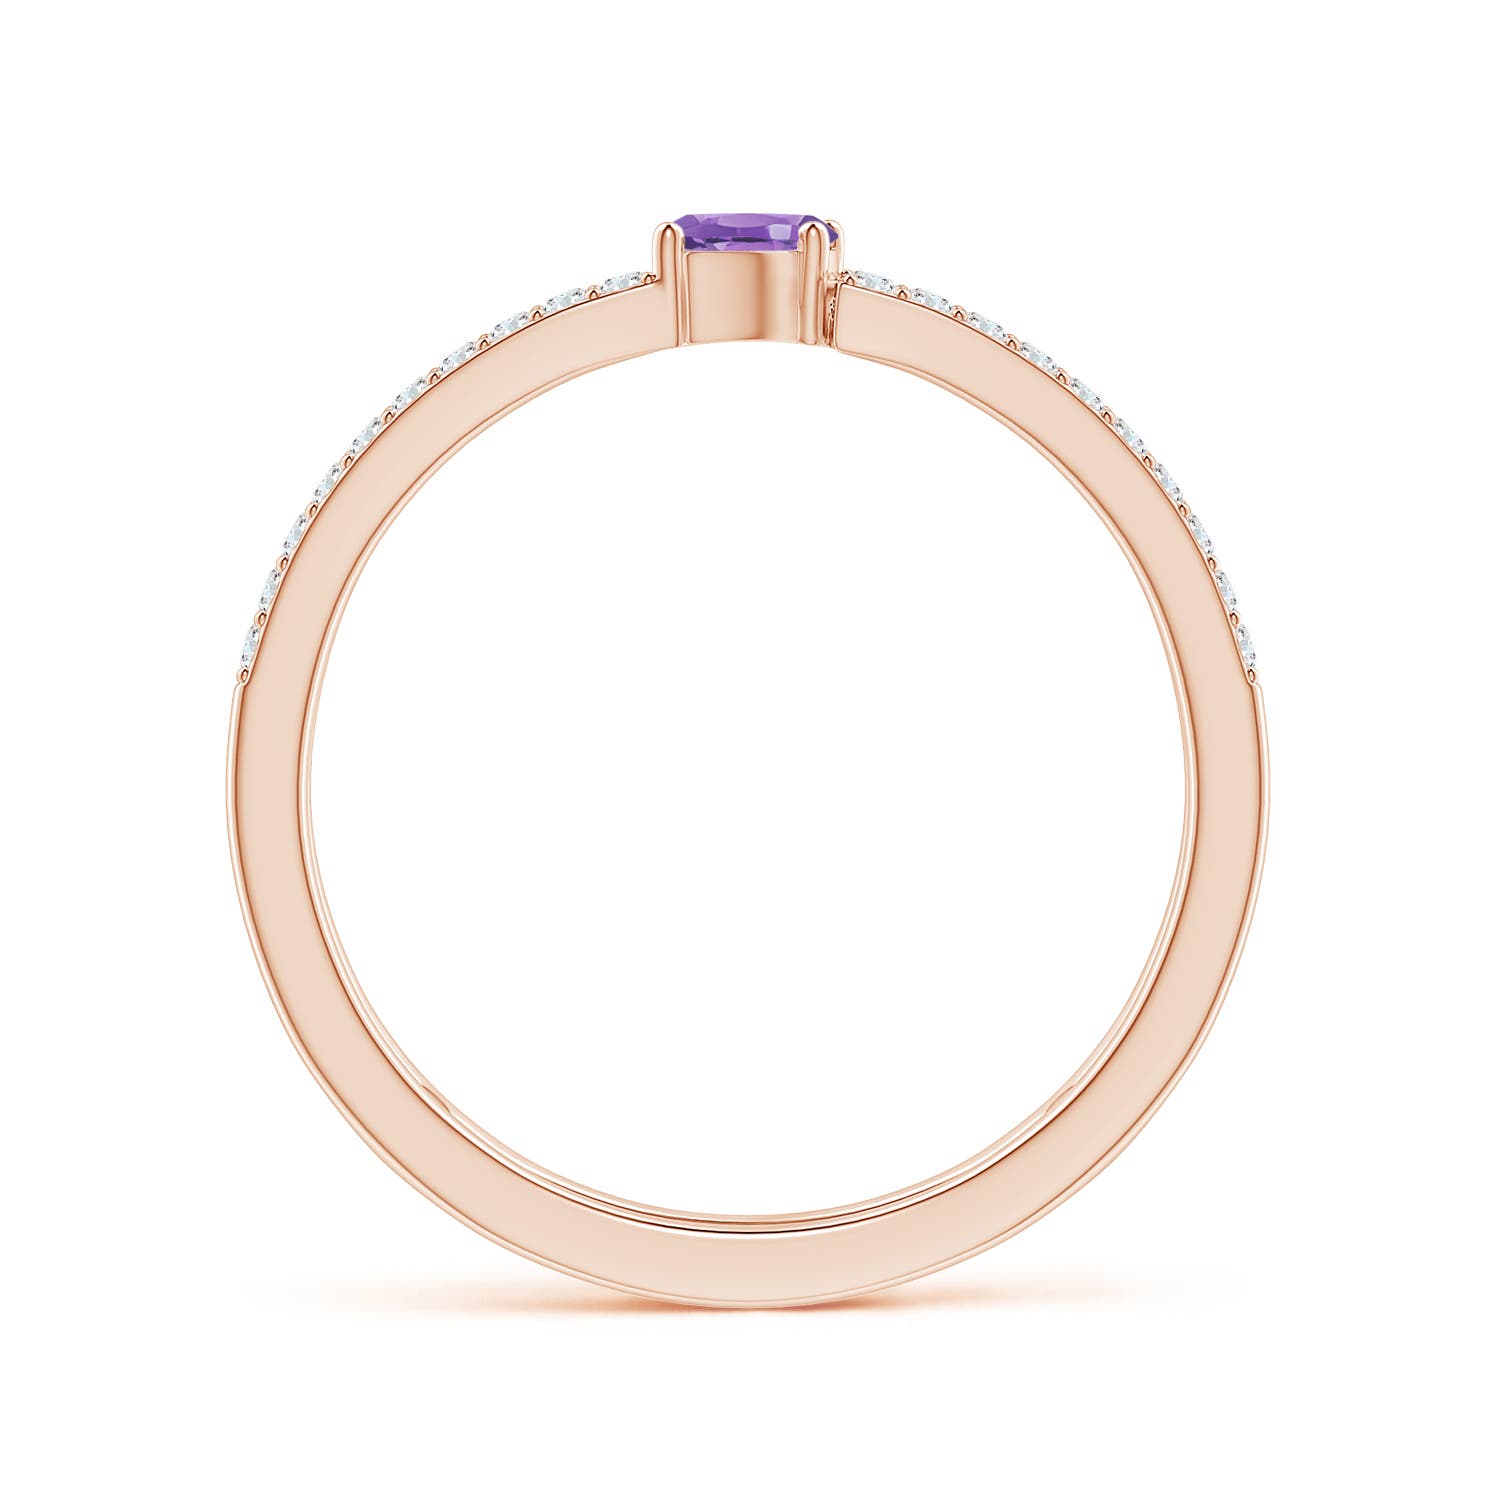 AA - Amethyst / 0.44 CT / 14 KT Rose Gold